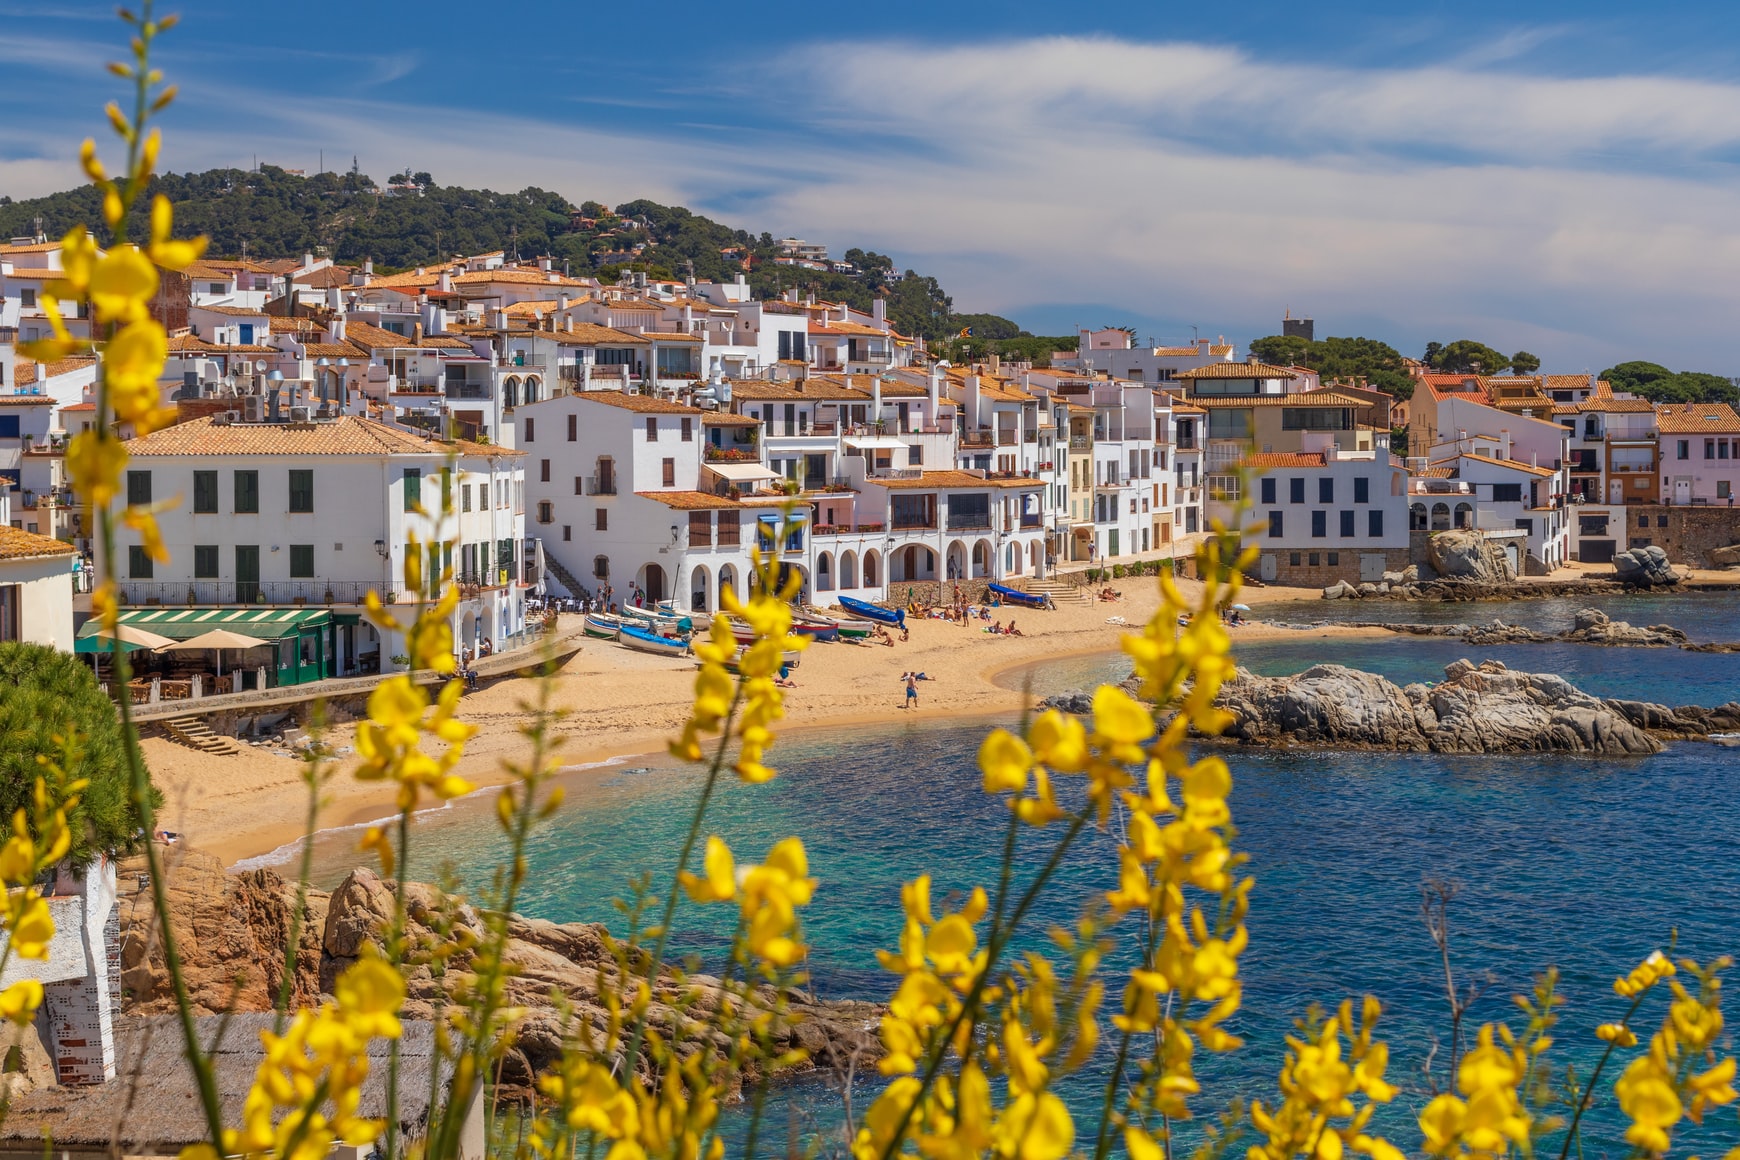 The best places to live in Spain for Expats with different needs